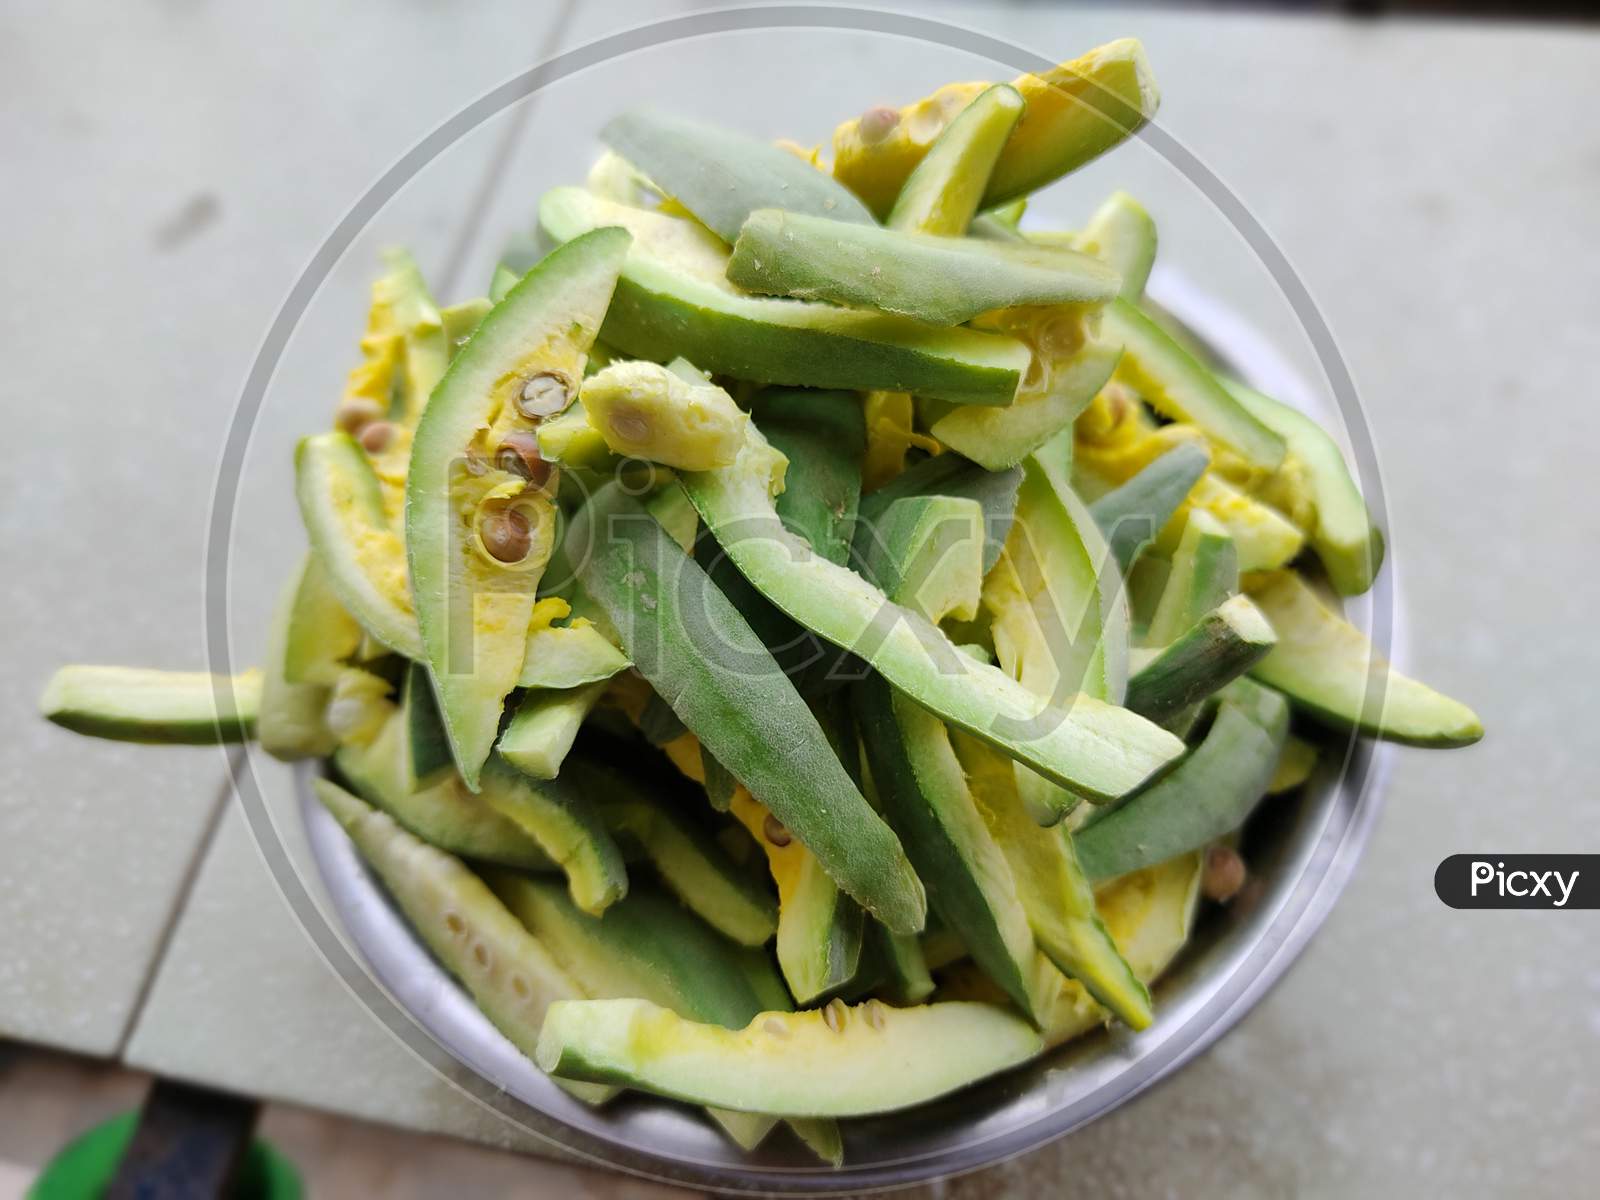 pointed gourd green vegetable cut into pieces kept in a bowl